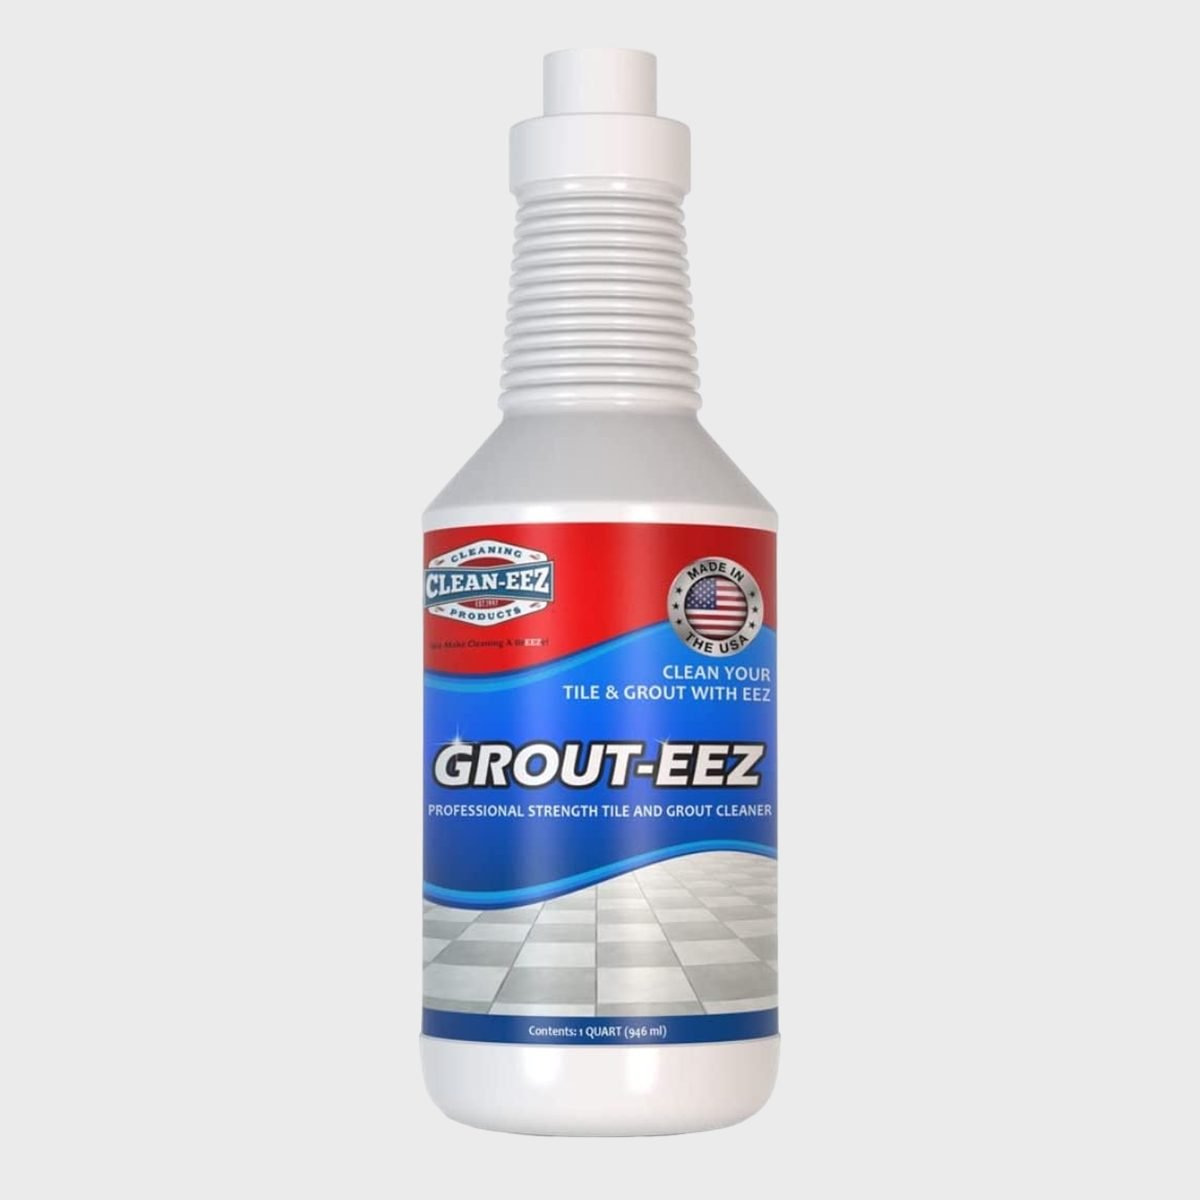 Goo Gone Grout and Tile Cleaner - 28 Ounce - Removes Tough Stains Dirt Caused by Mold Mildew Soap Scum and Hard Water Staining - Safe on Tile